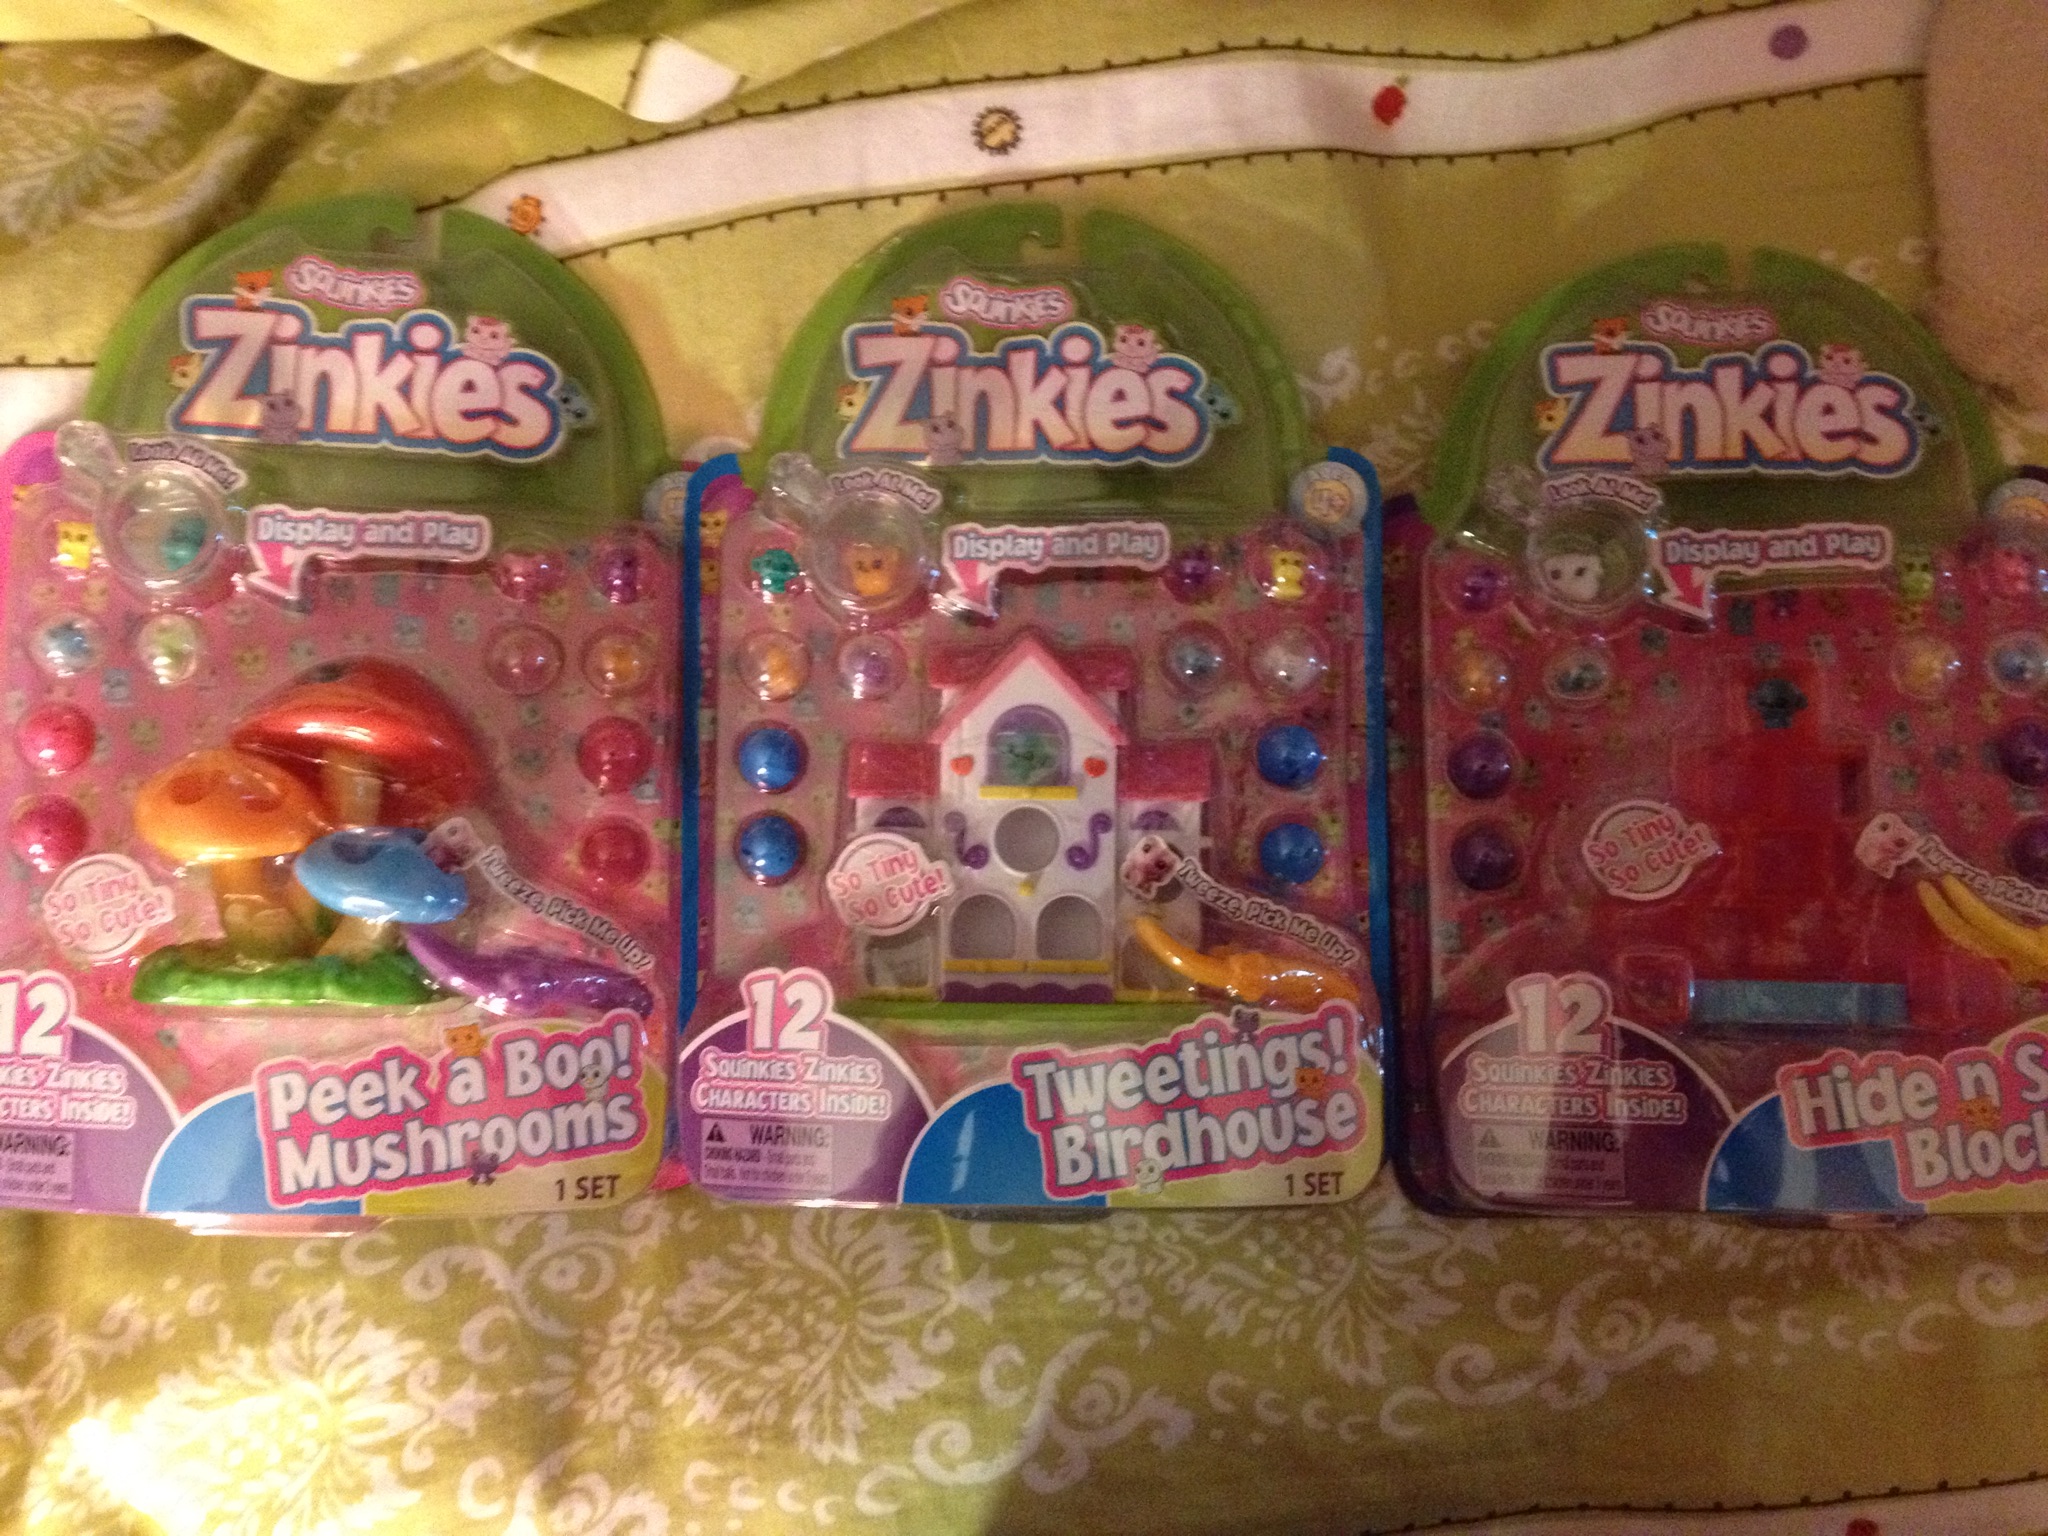 Smaller than Small: Squinkies Zinkies Review